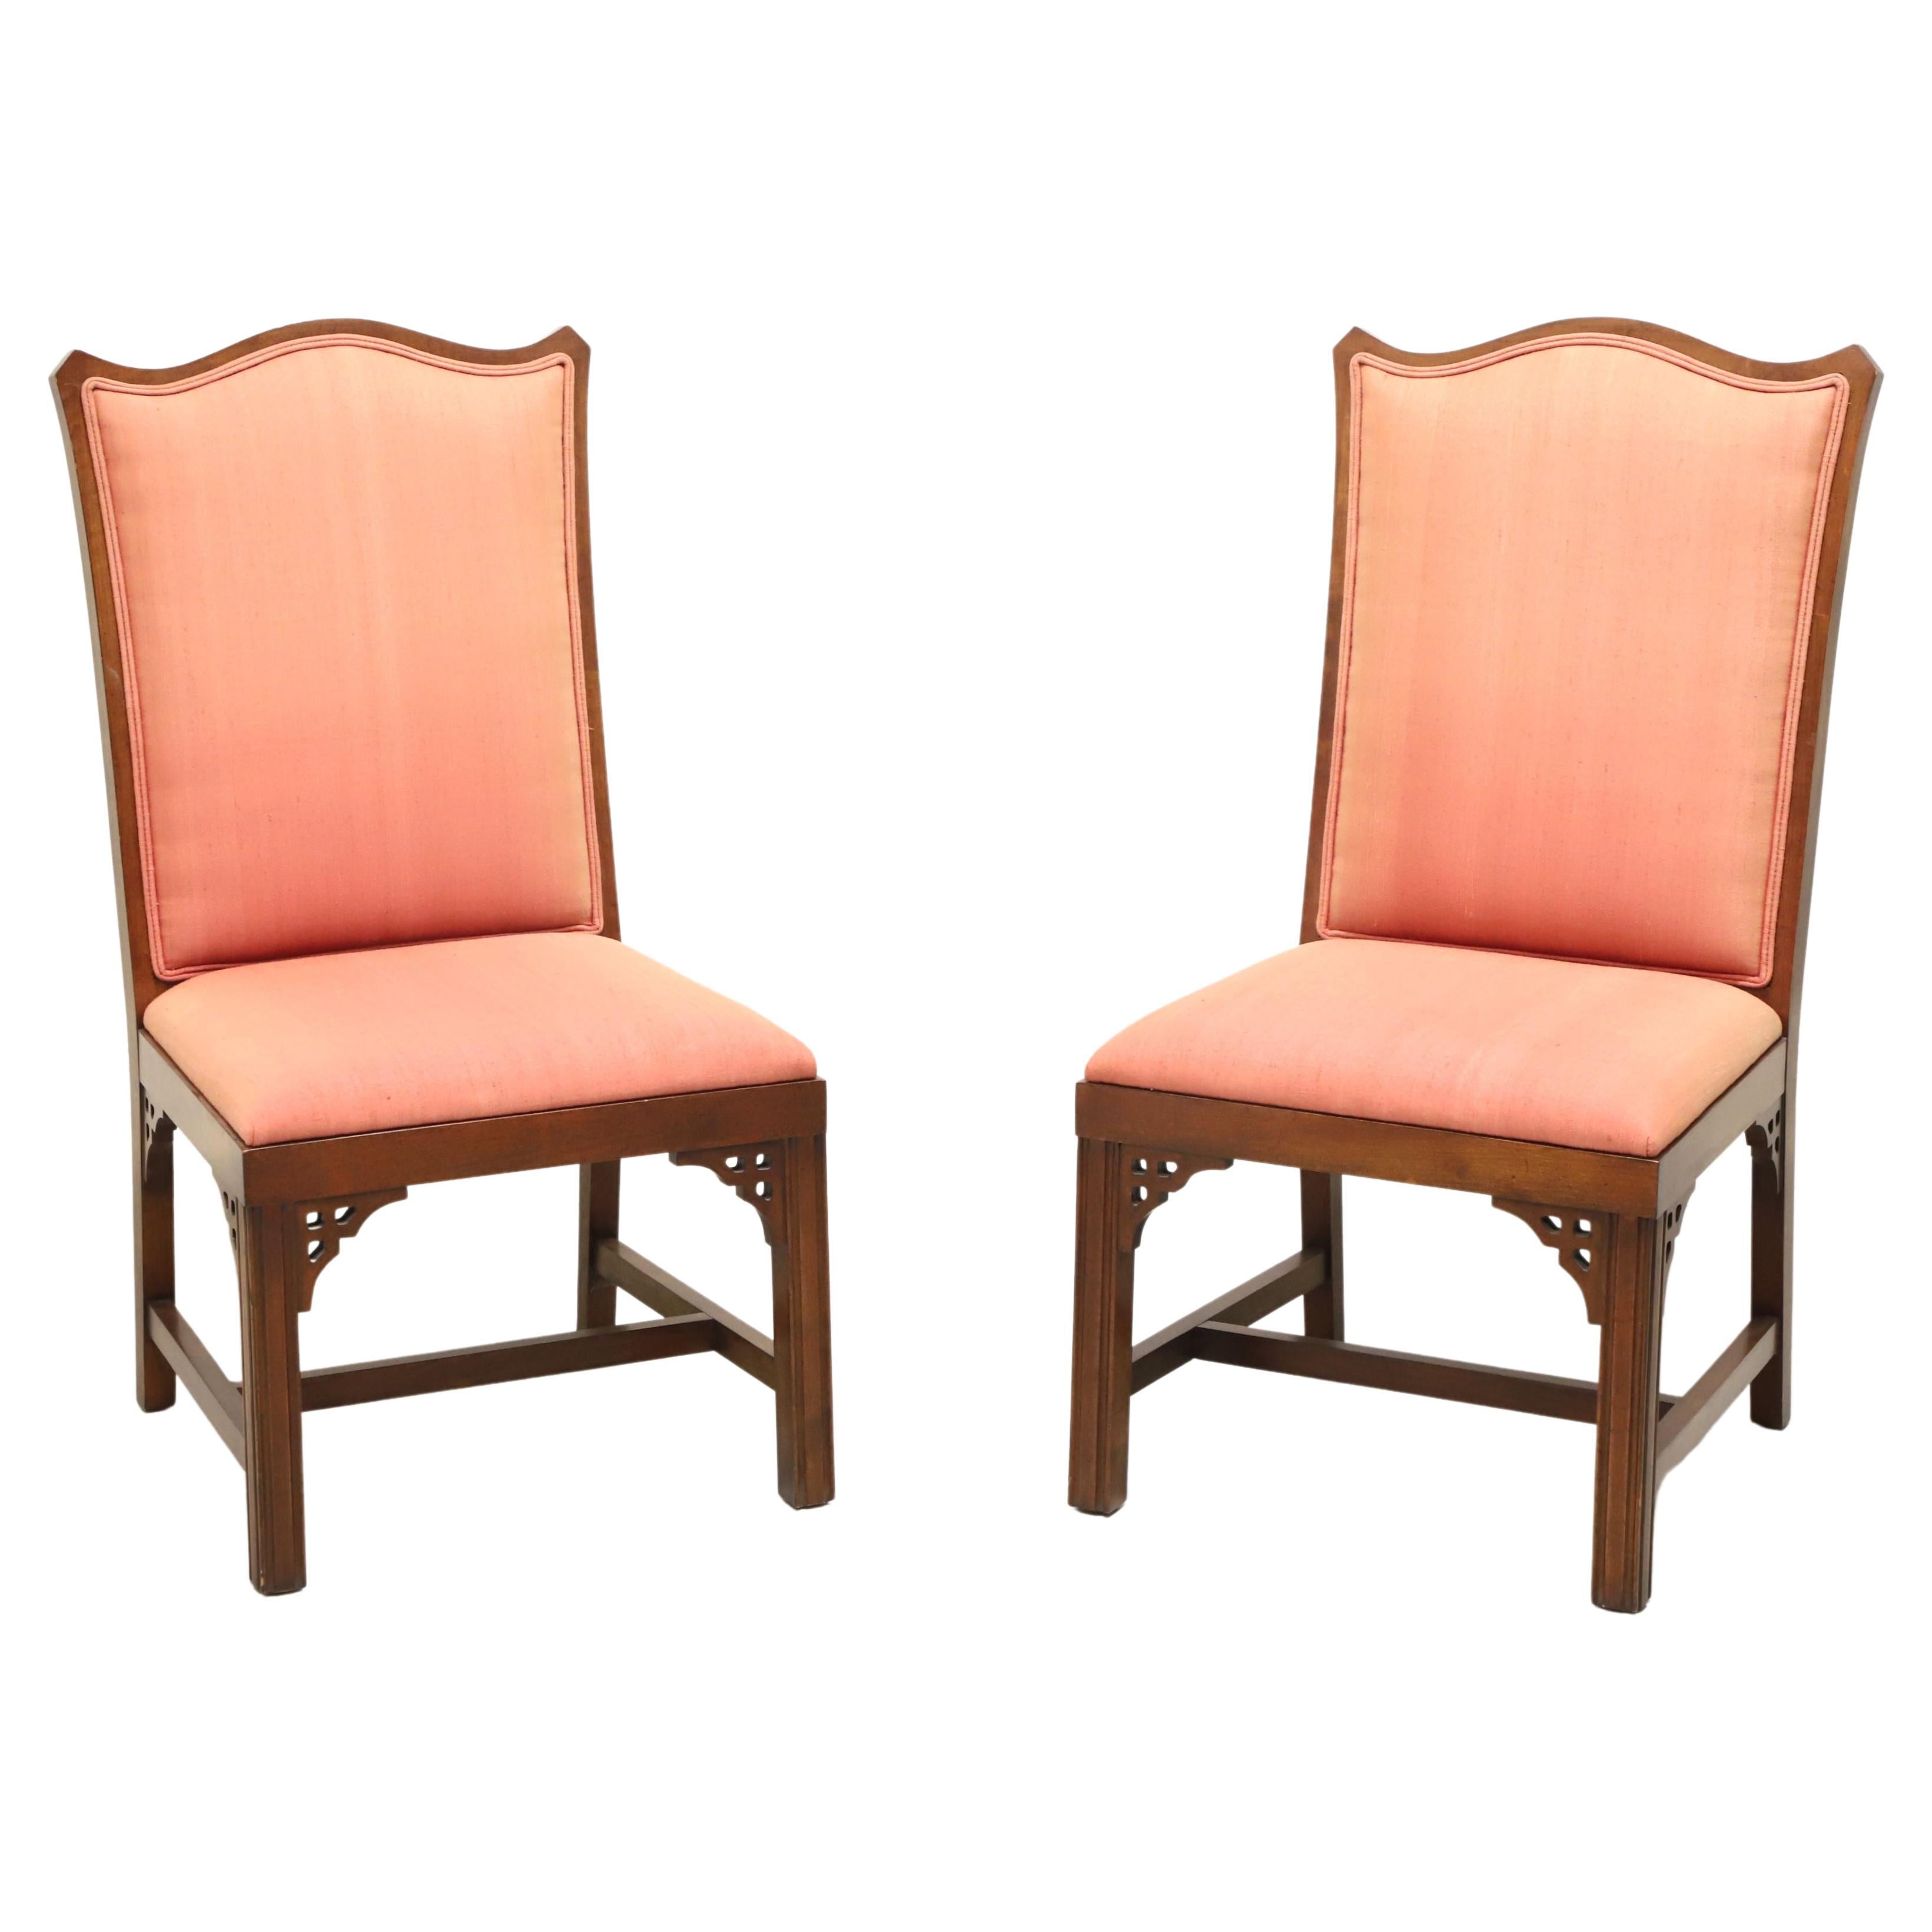 Mid 20th Century Cherry Asian Inspired Dining Side Chairs - Pair A